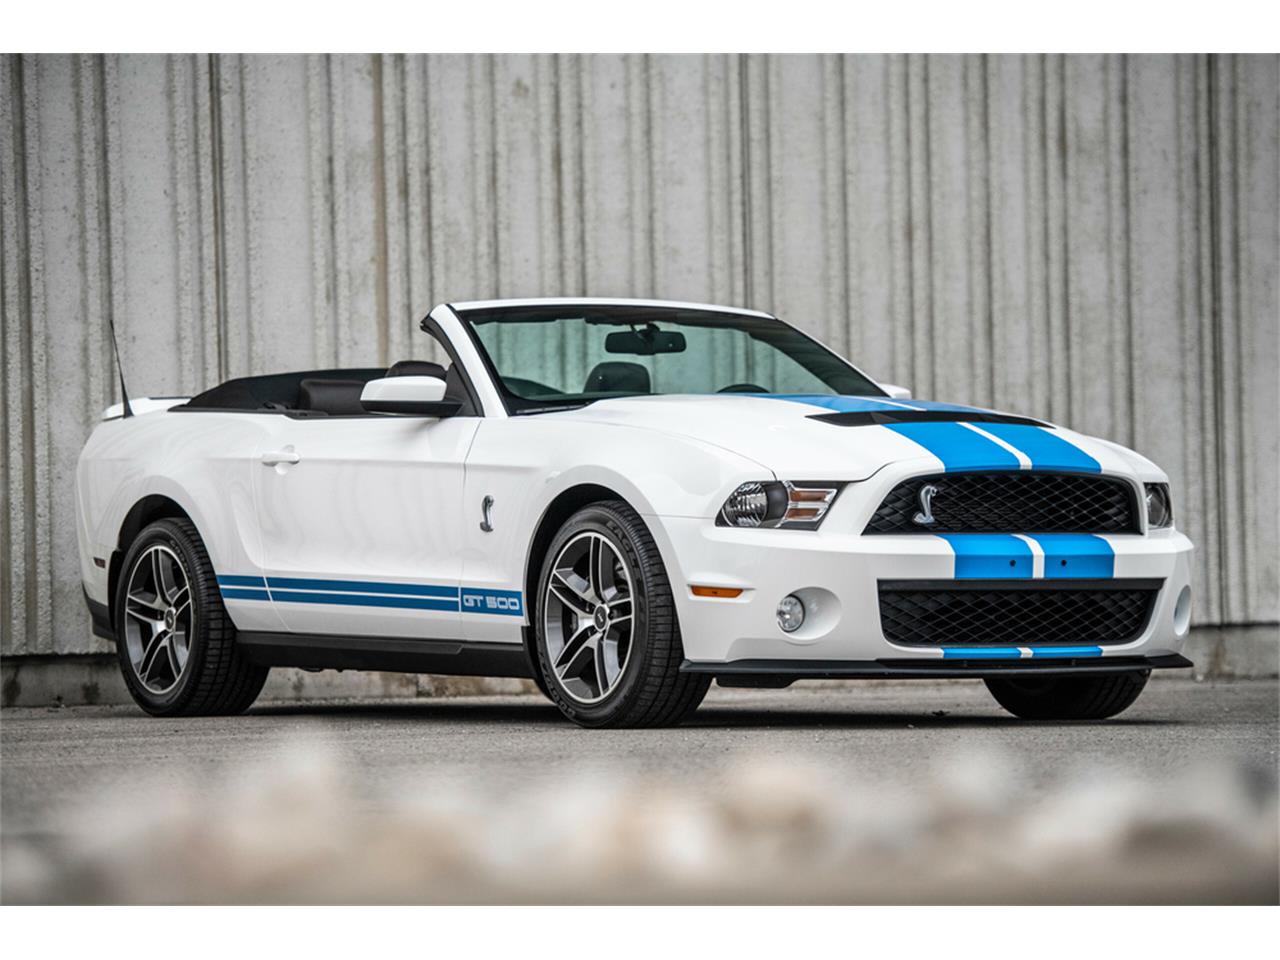 2010 Shelby GT500 for Sale | ClassicCars.com | CC-1298664